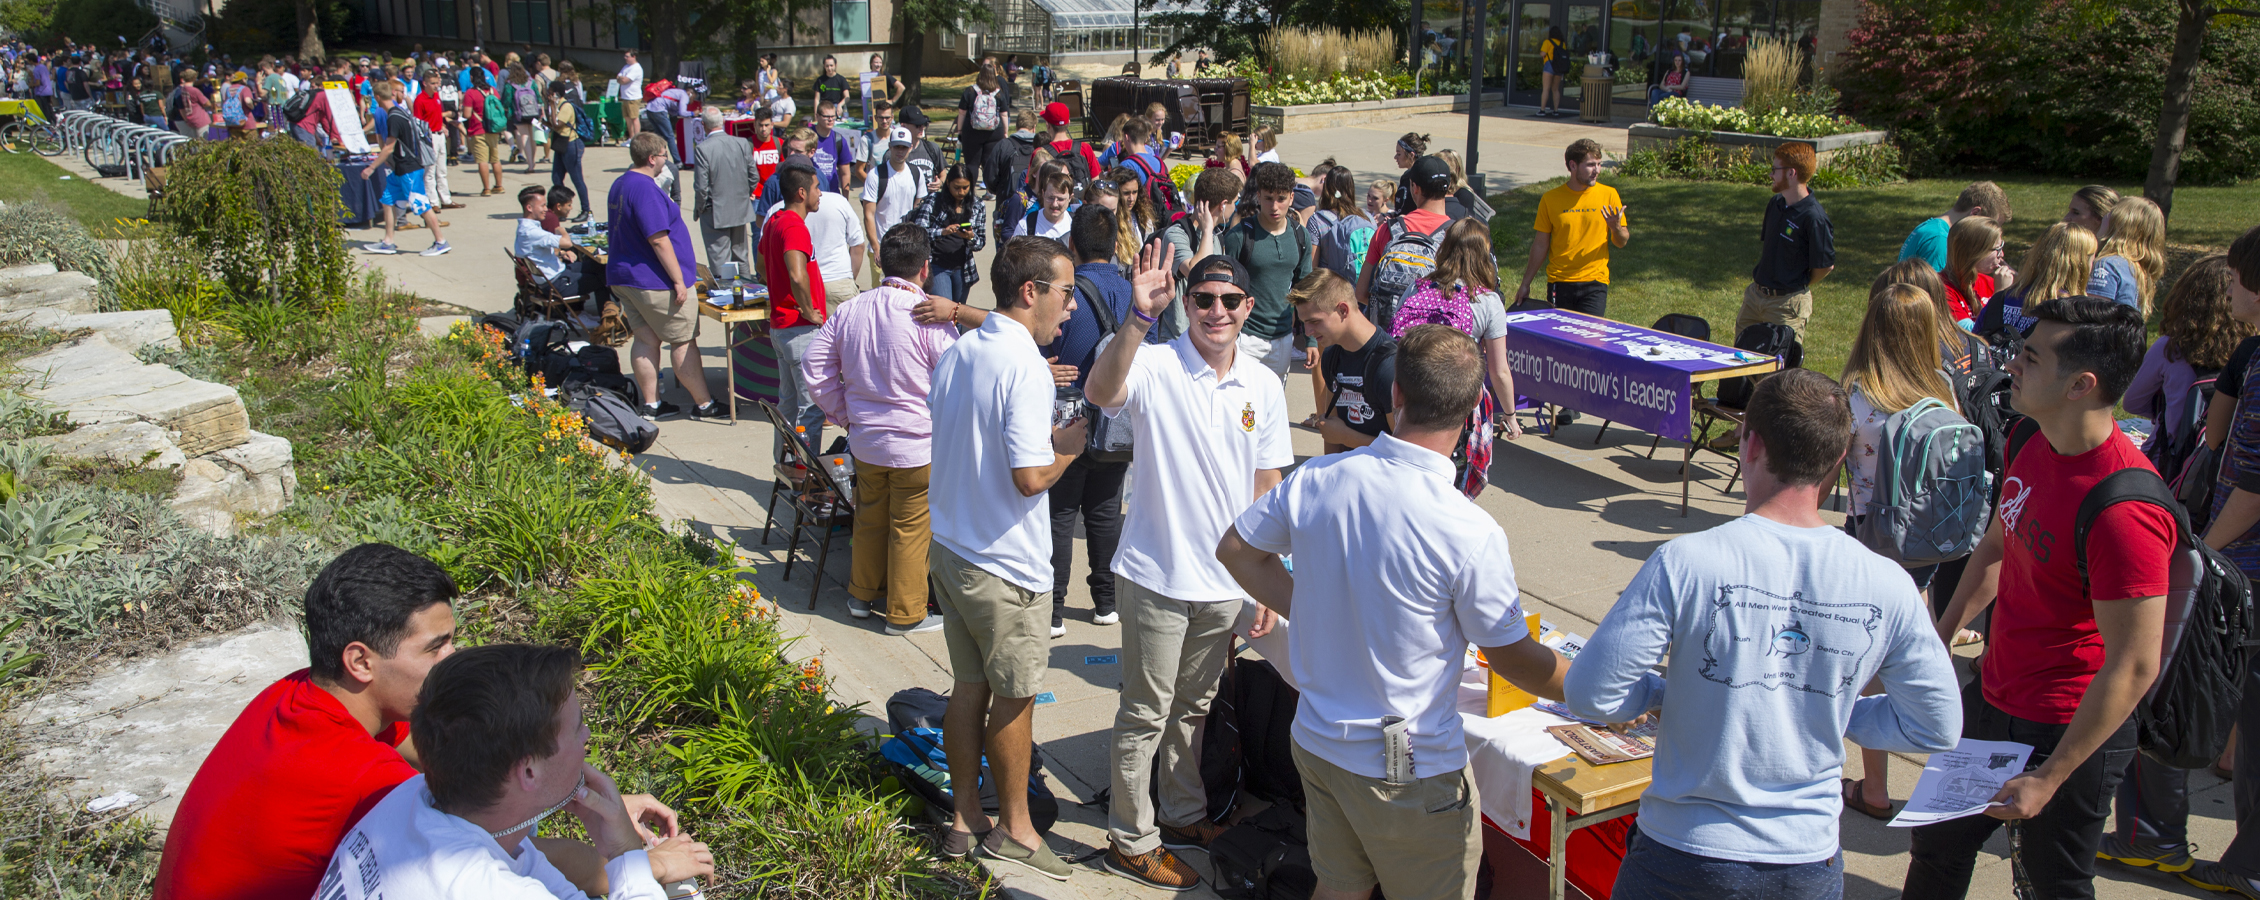 Students on the Wyman Mall during the Involvement Fair.